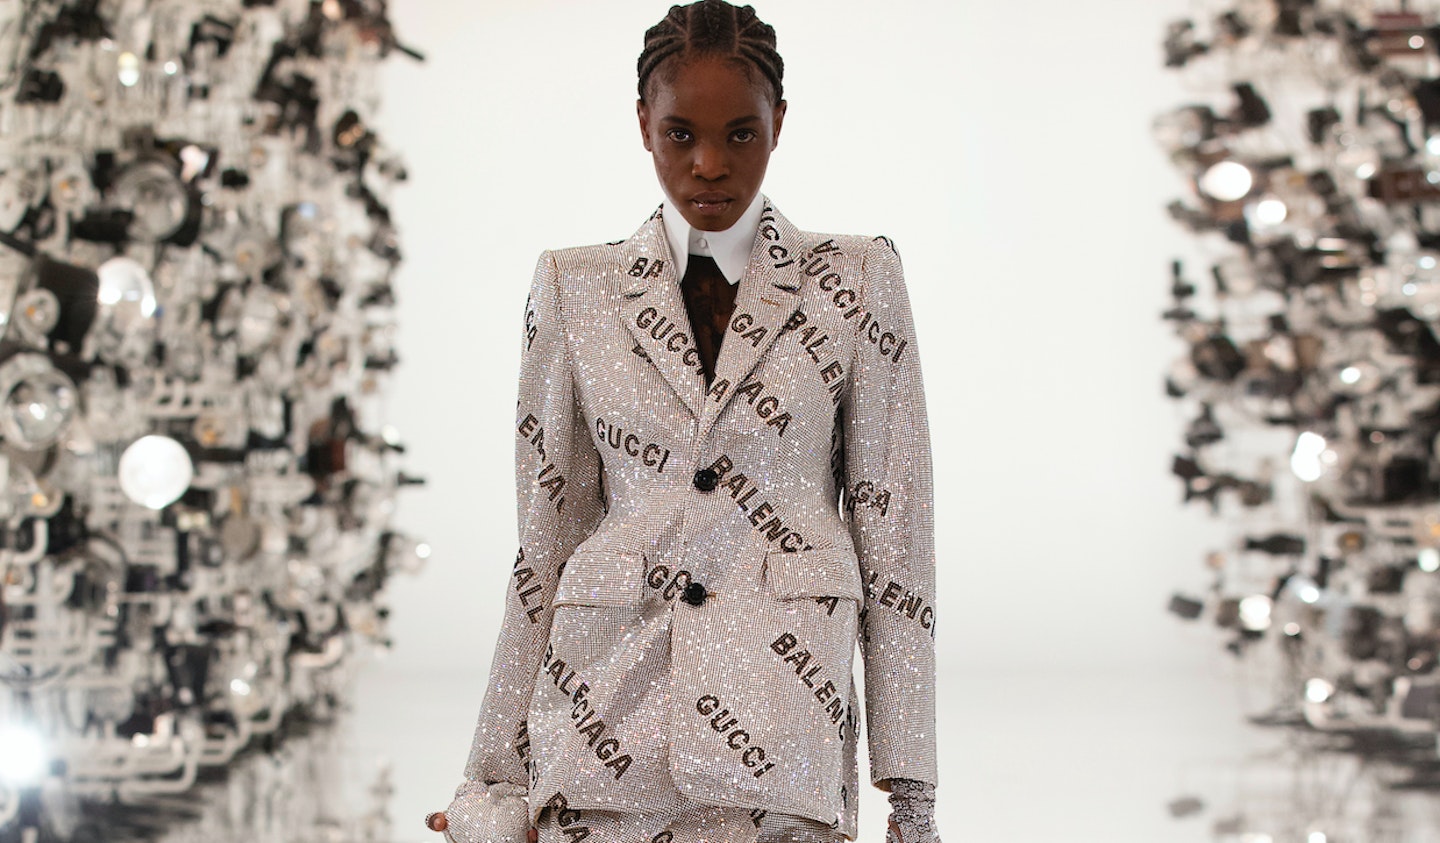 Balenciaga Interpreted Gucci Products for Its Spring 2022